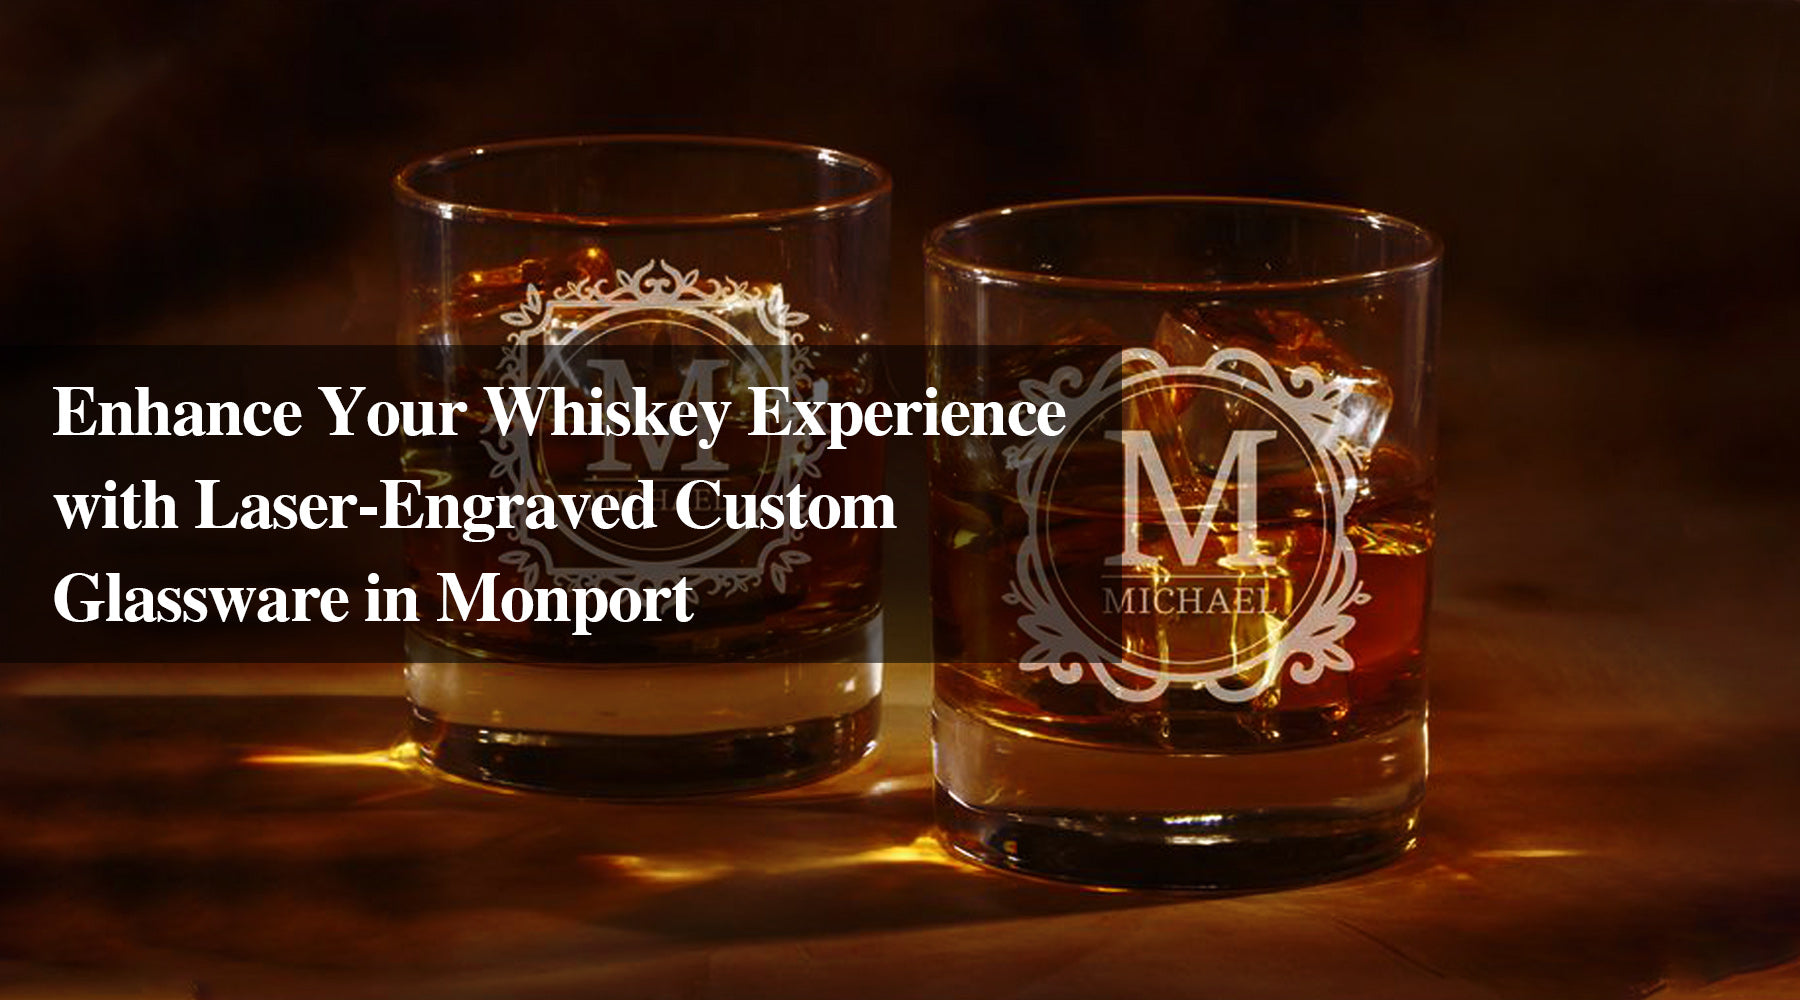 Enhance Your Whiskey Experience with Laser Engraved Custom Glassware in Monport